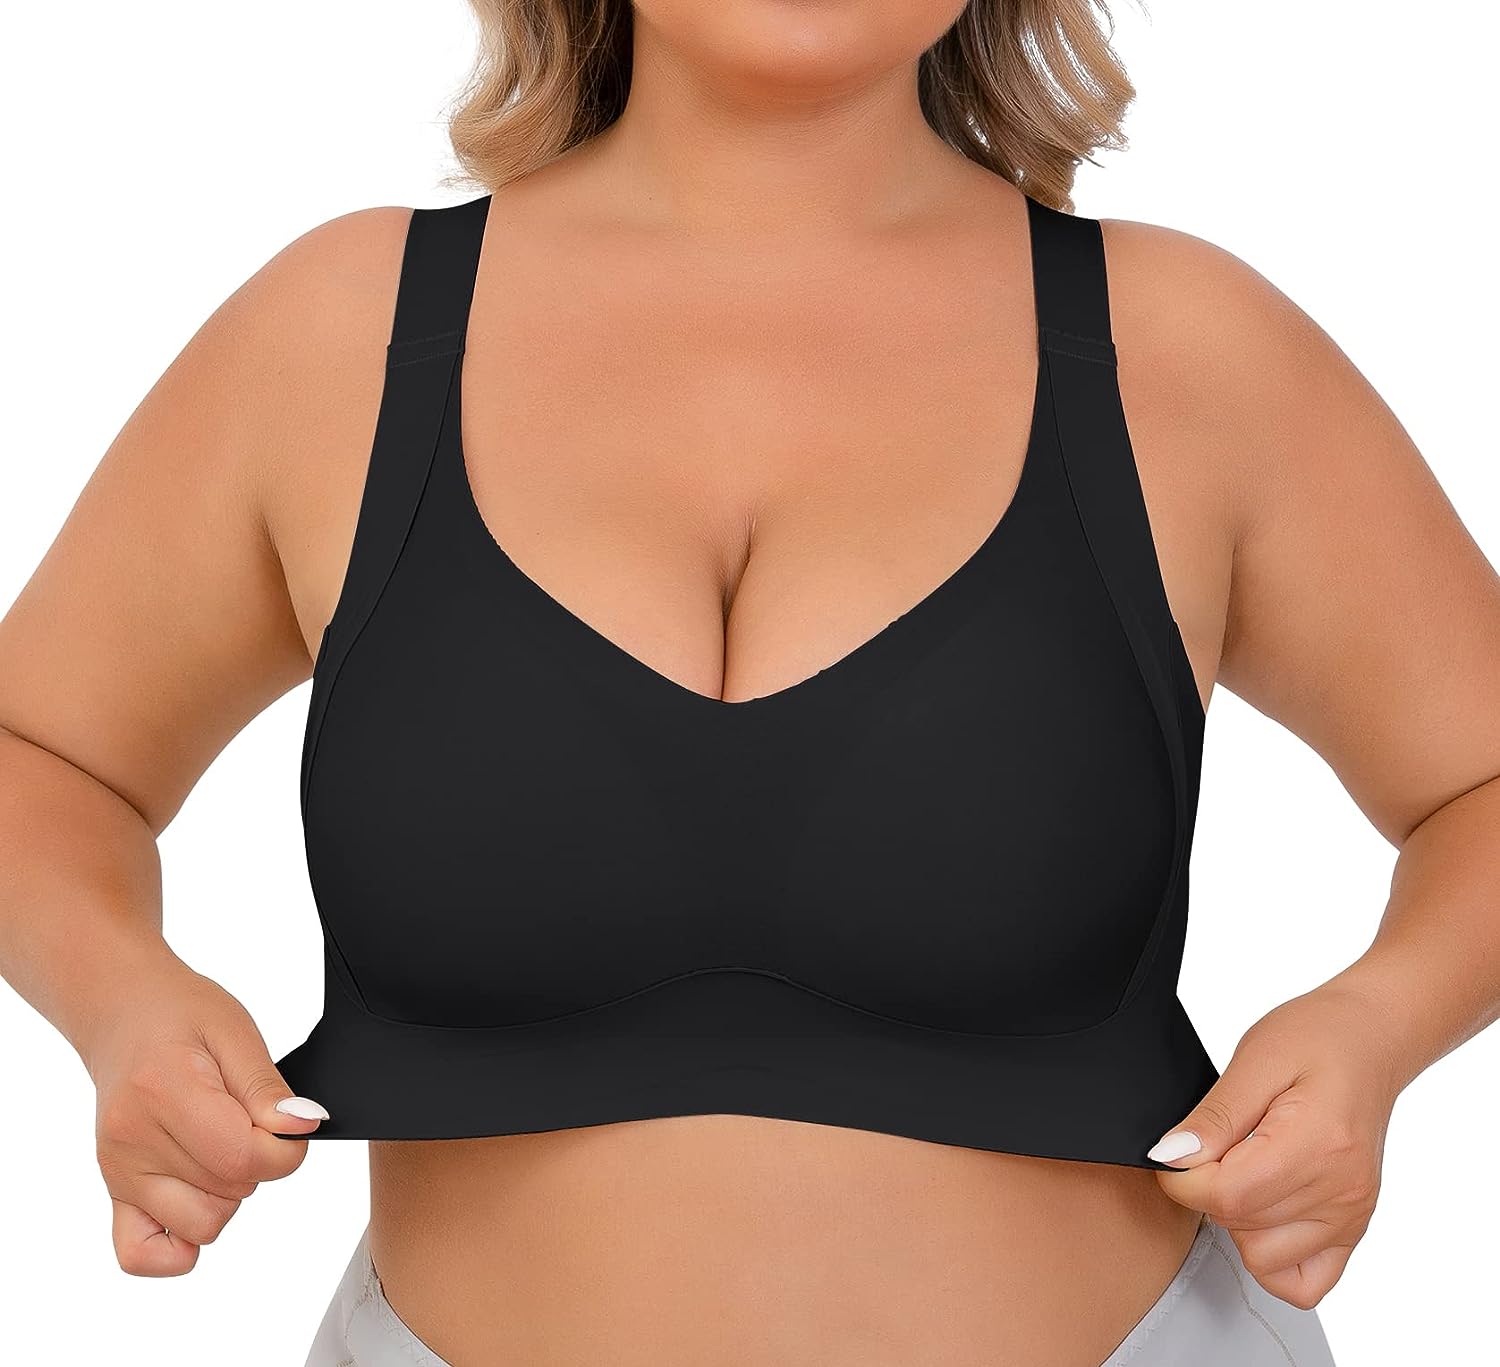  Gabrioir Women's Corrective Bra, Large Size, Padded, Bust  Enhancing, Beautiful Breasts, Won't Sway, Painless, Cleavage Makeup, Top,  High Side Design, Back Hook Type, Easy to Put On and Take Off, Bra